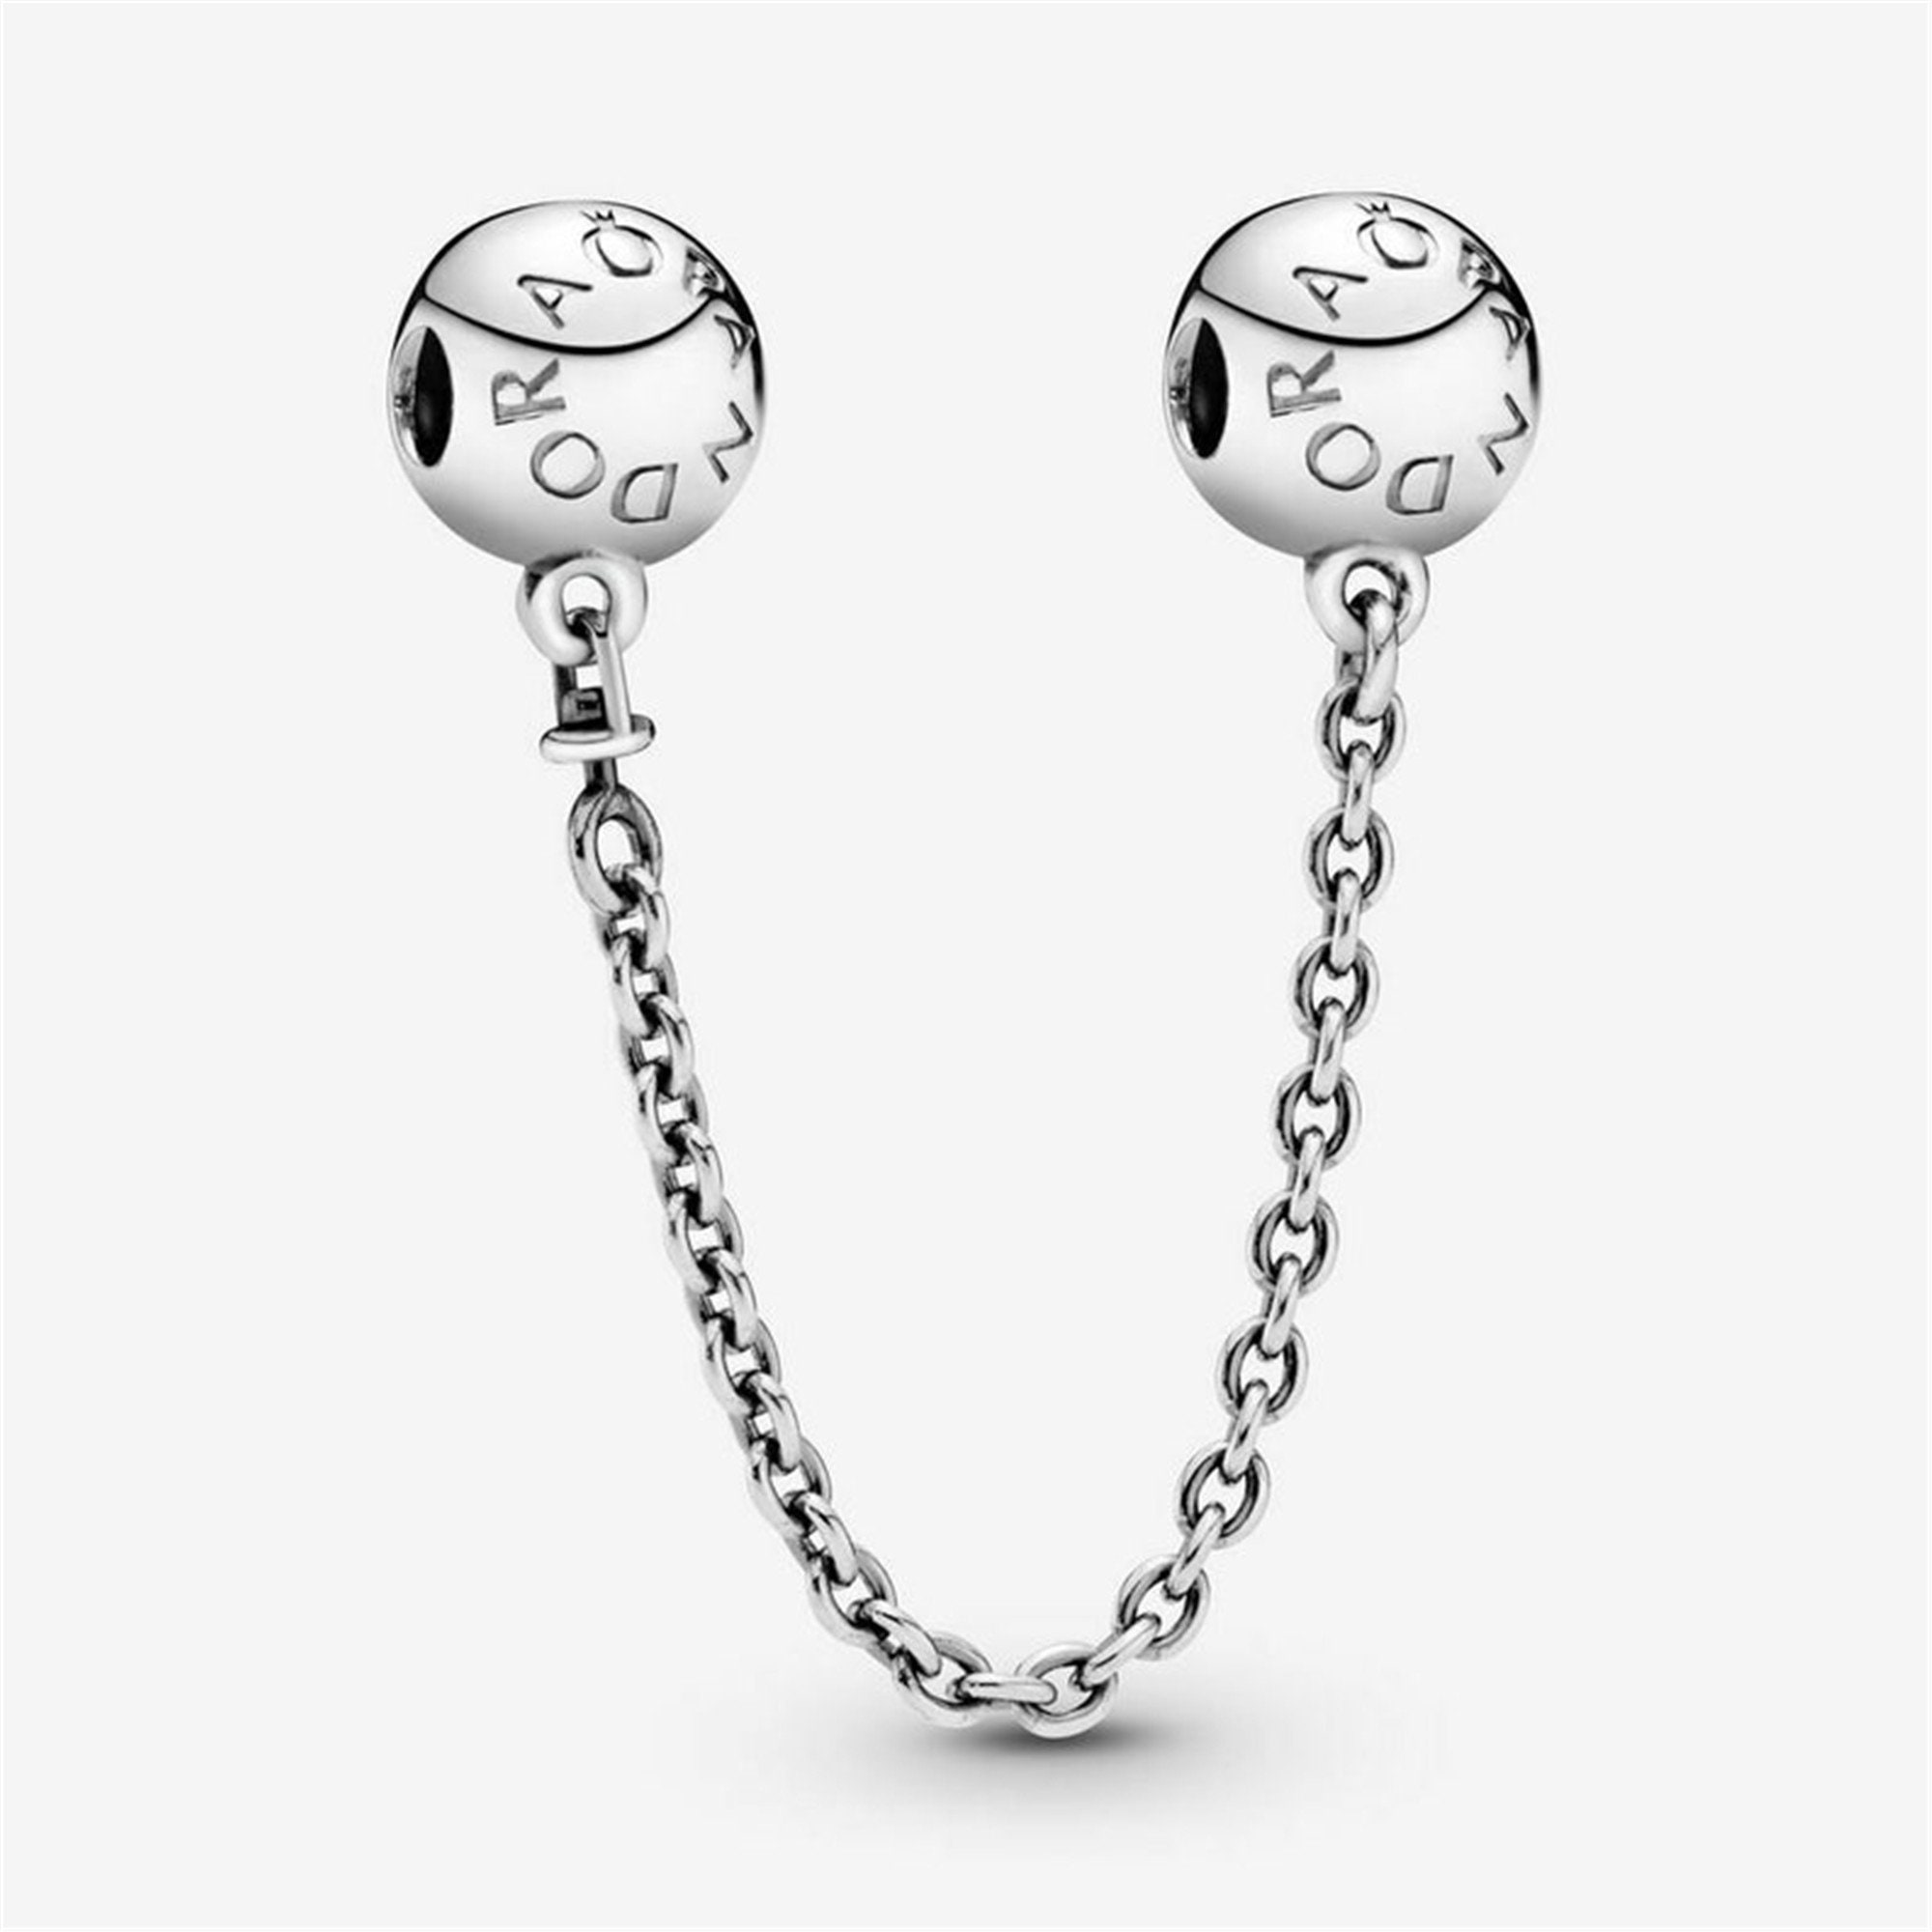 925 Sterling Silver Safety Chain Charm Bead Love Heart Flower Snowflake Bow Clear CZ Crystal Stopper Lock Clip Beads Women DIY Jewelry Fits Bracelet or European Snake Chain Charms Silver, 